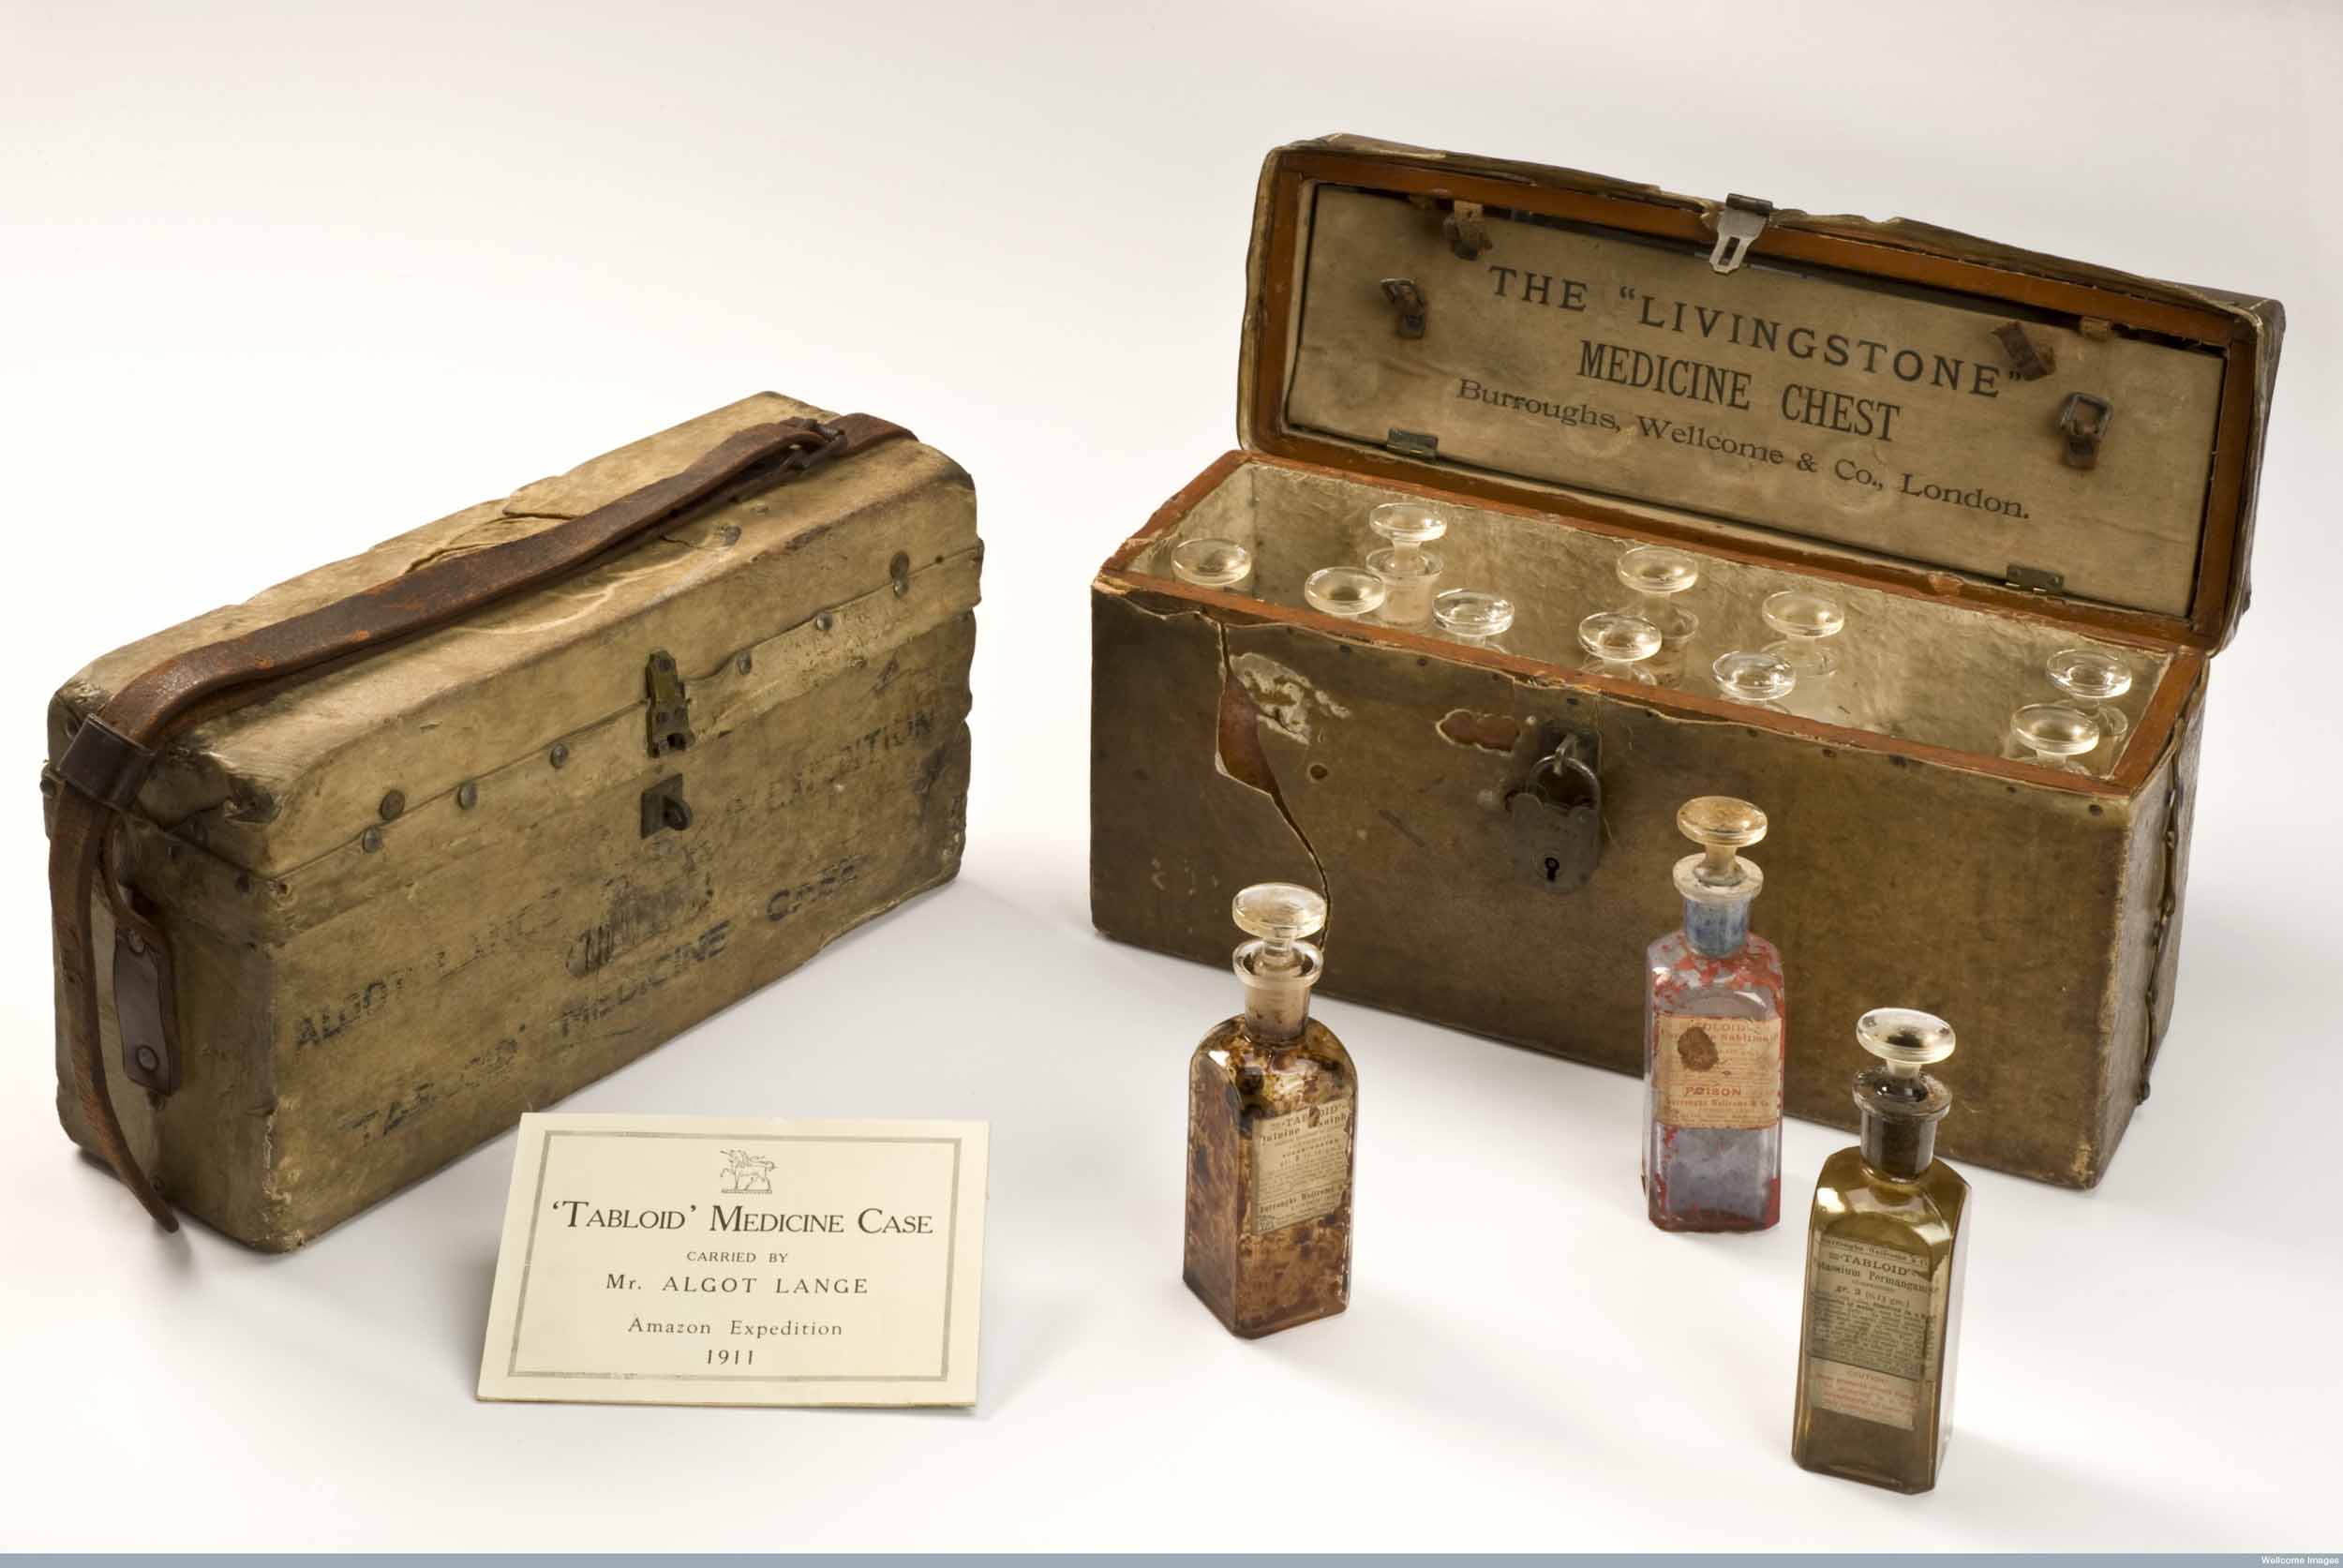 The ‘Livingstone’ medicine chest, named after David Livingstone and made by Burroughs, Wellcome & Co, who often provided medicine chests to expeditions free of charge for publicity. Copyright Wellcome Library, London. Creative Commons Attribution 4.0 International (https://creativecommons.org/licenses/by/4.0/).